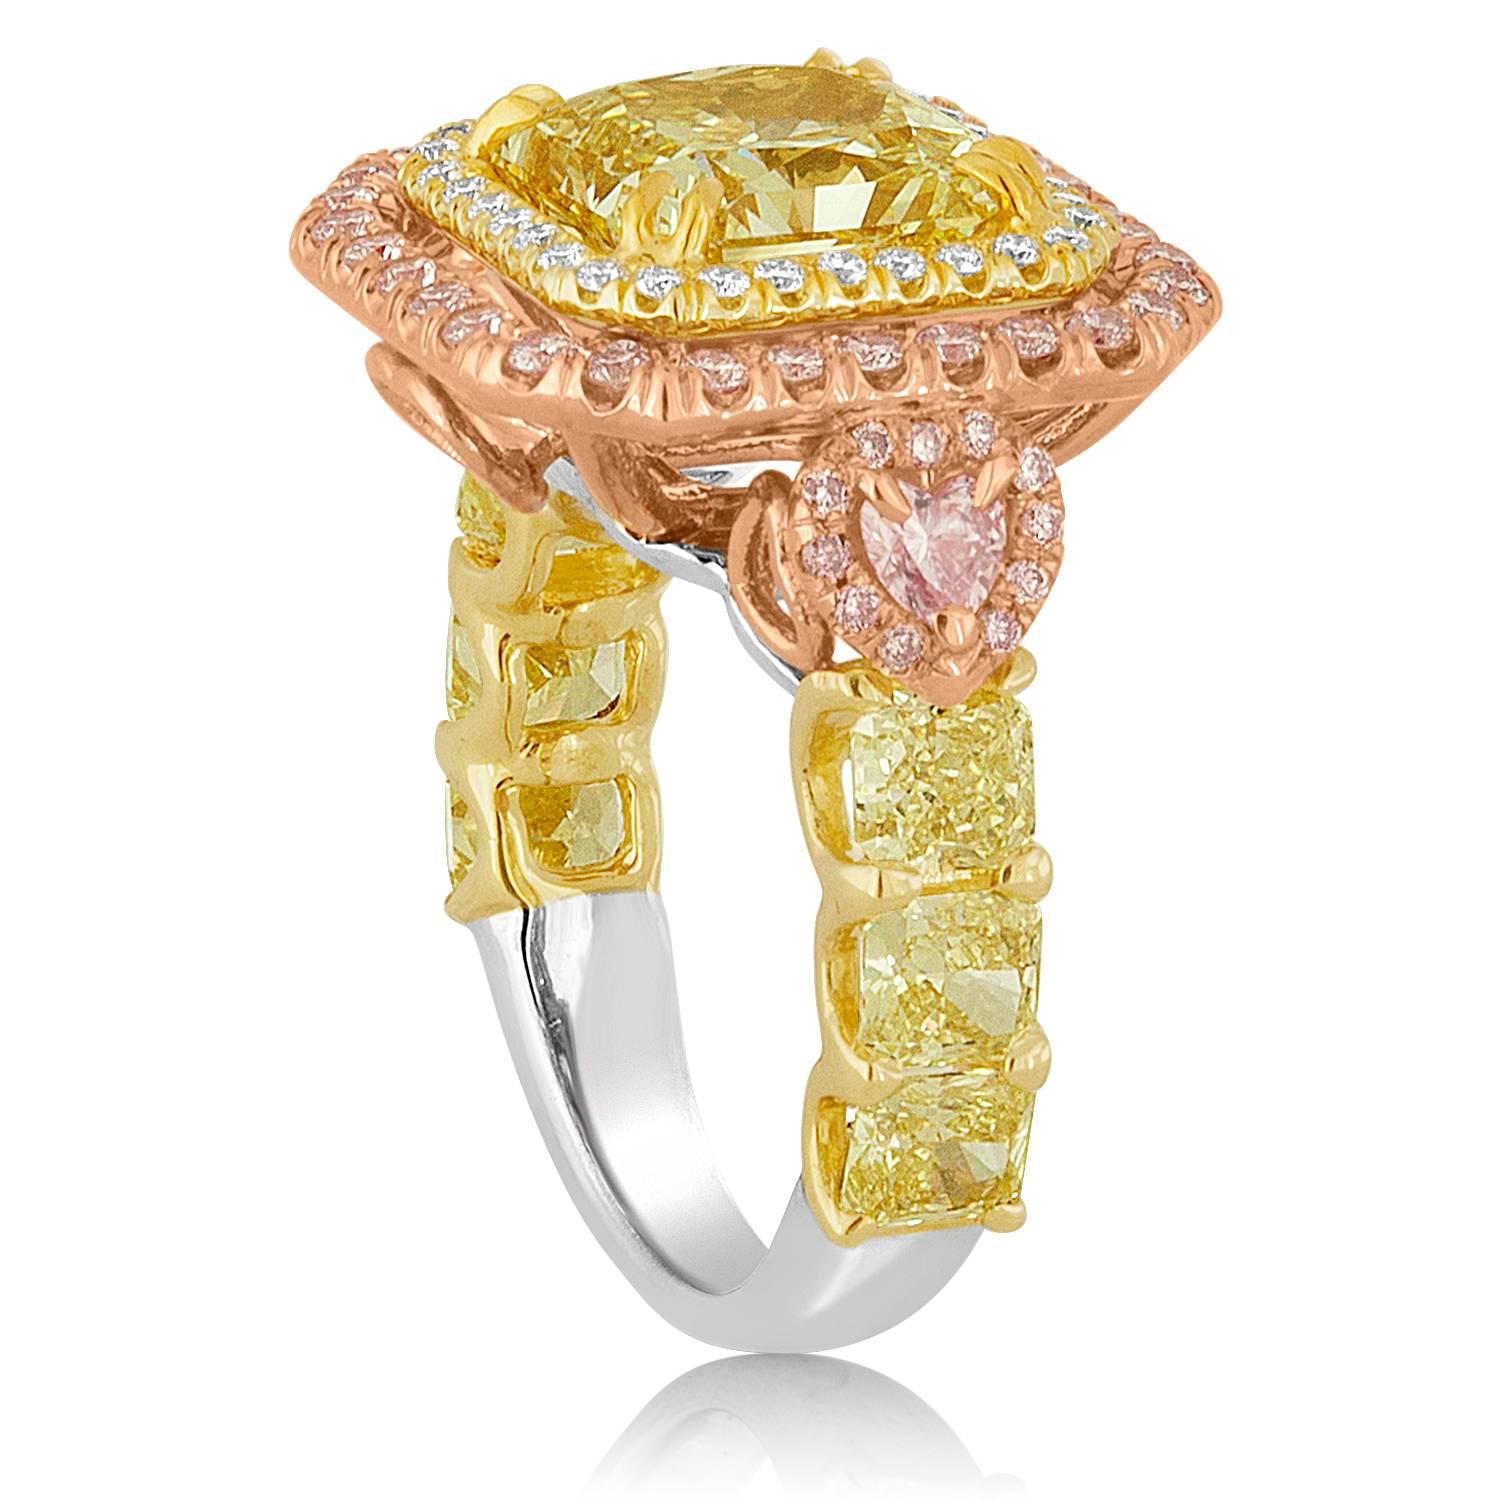 Absolutely Stunning, hand made, one of a kind Diamond Ring.
The huge center stone is  4.02ct GIA certified Fancy Yellow Diamond.
There are 0.75ct in Fancy Pink Diamonds
Each side has 3 Fancy Yellow Radiant Cut Diamonds.
There are 6 stones in